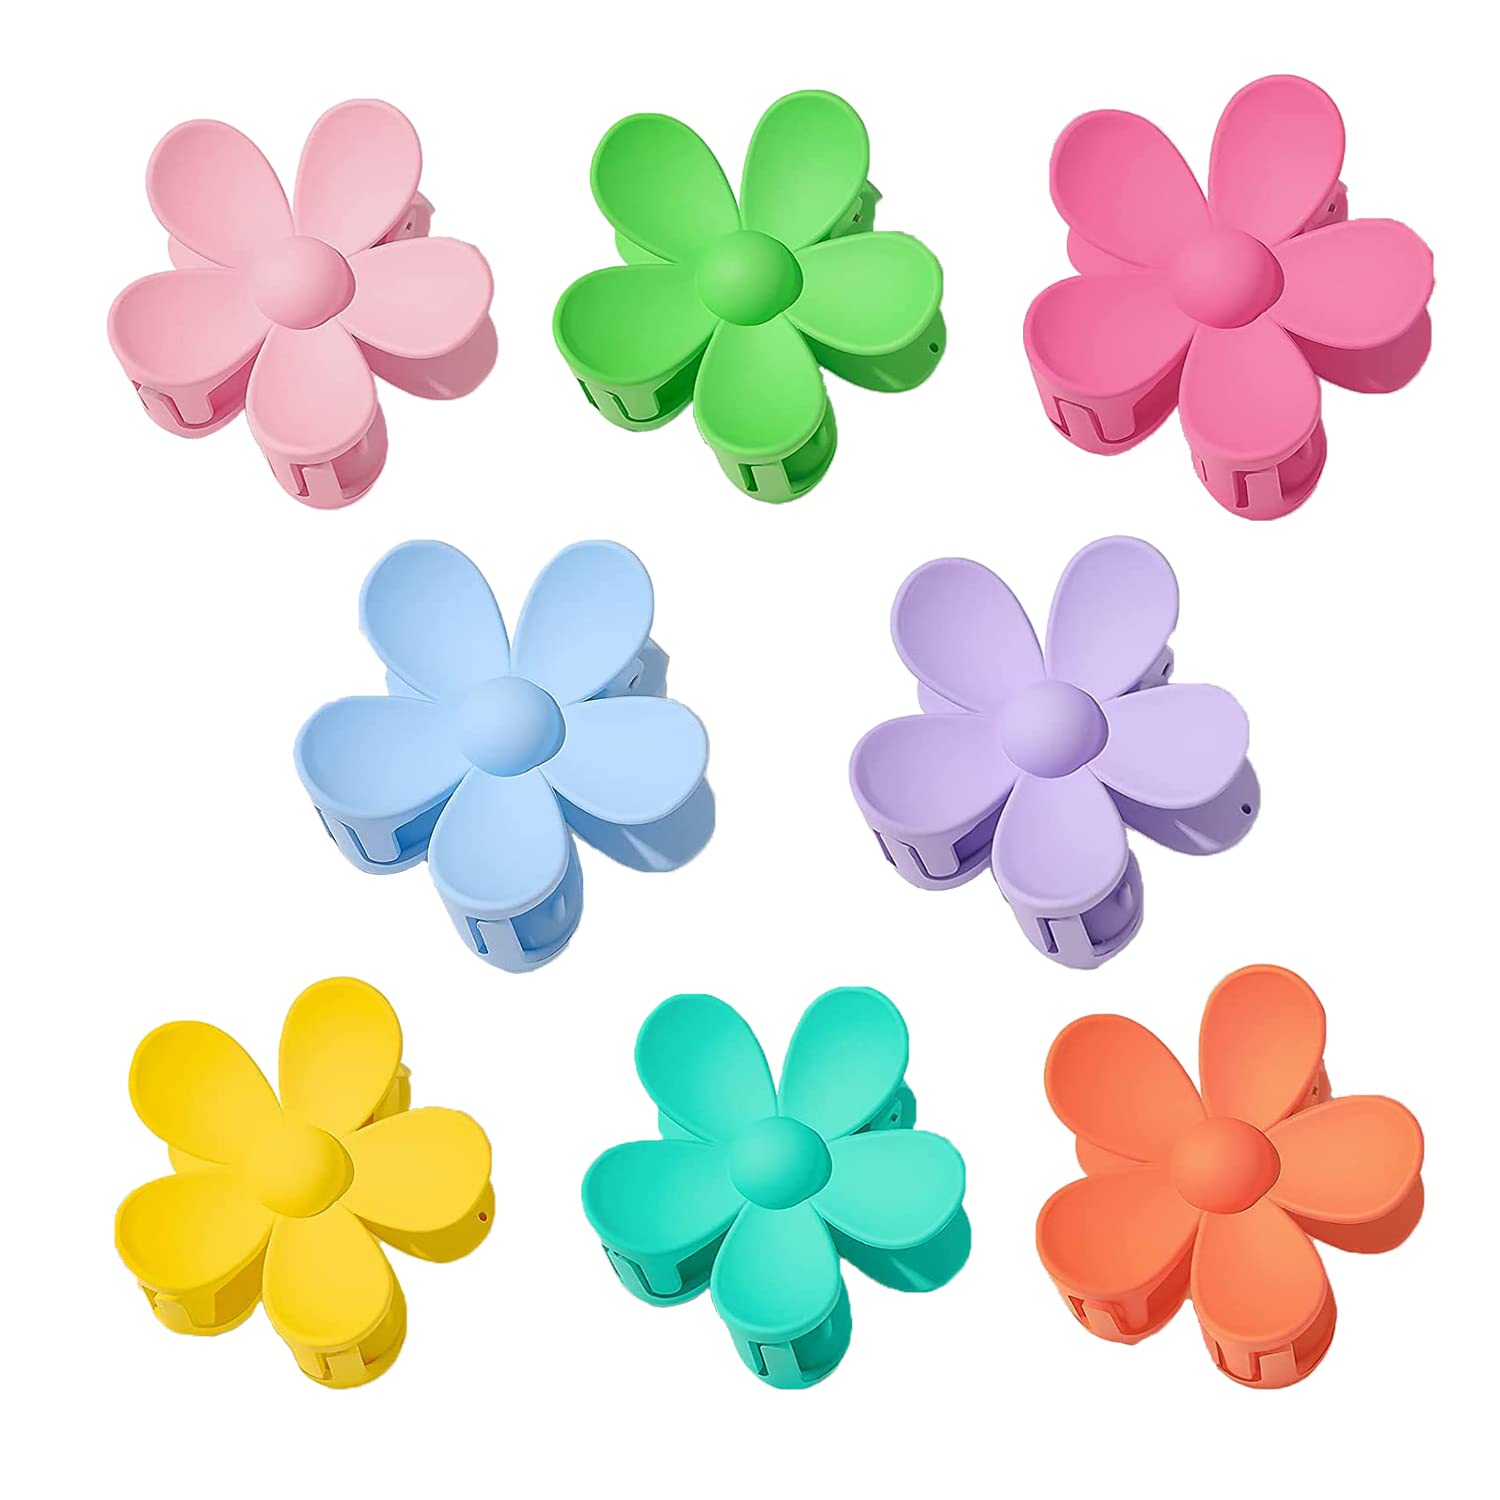  8PCS Hair Clips for Women, Flower Claw Clips for